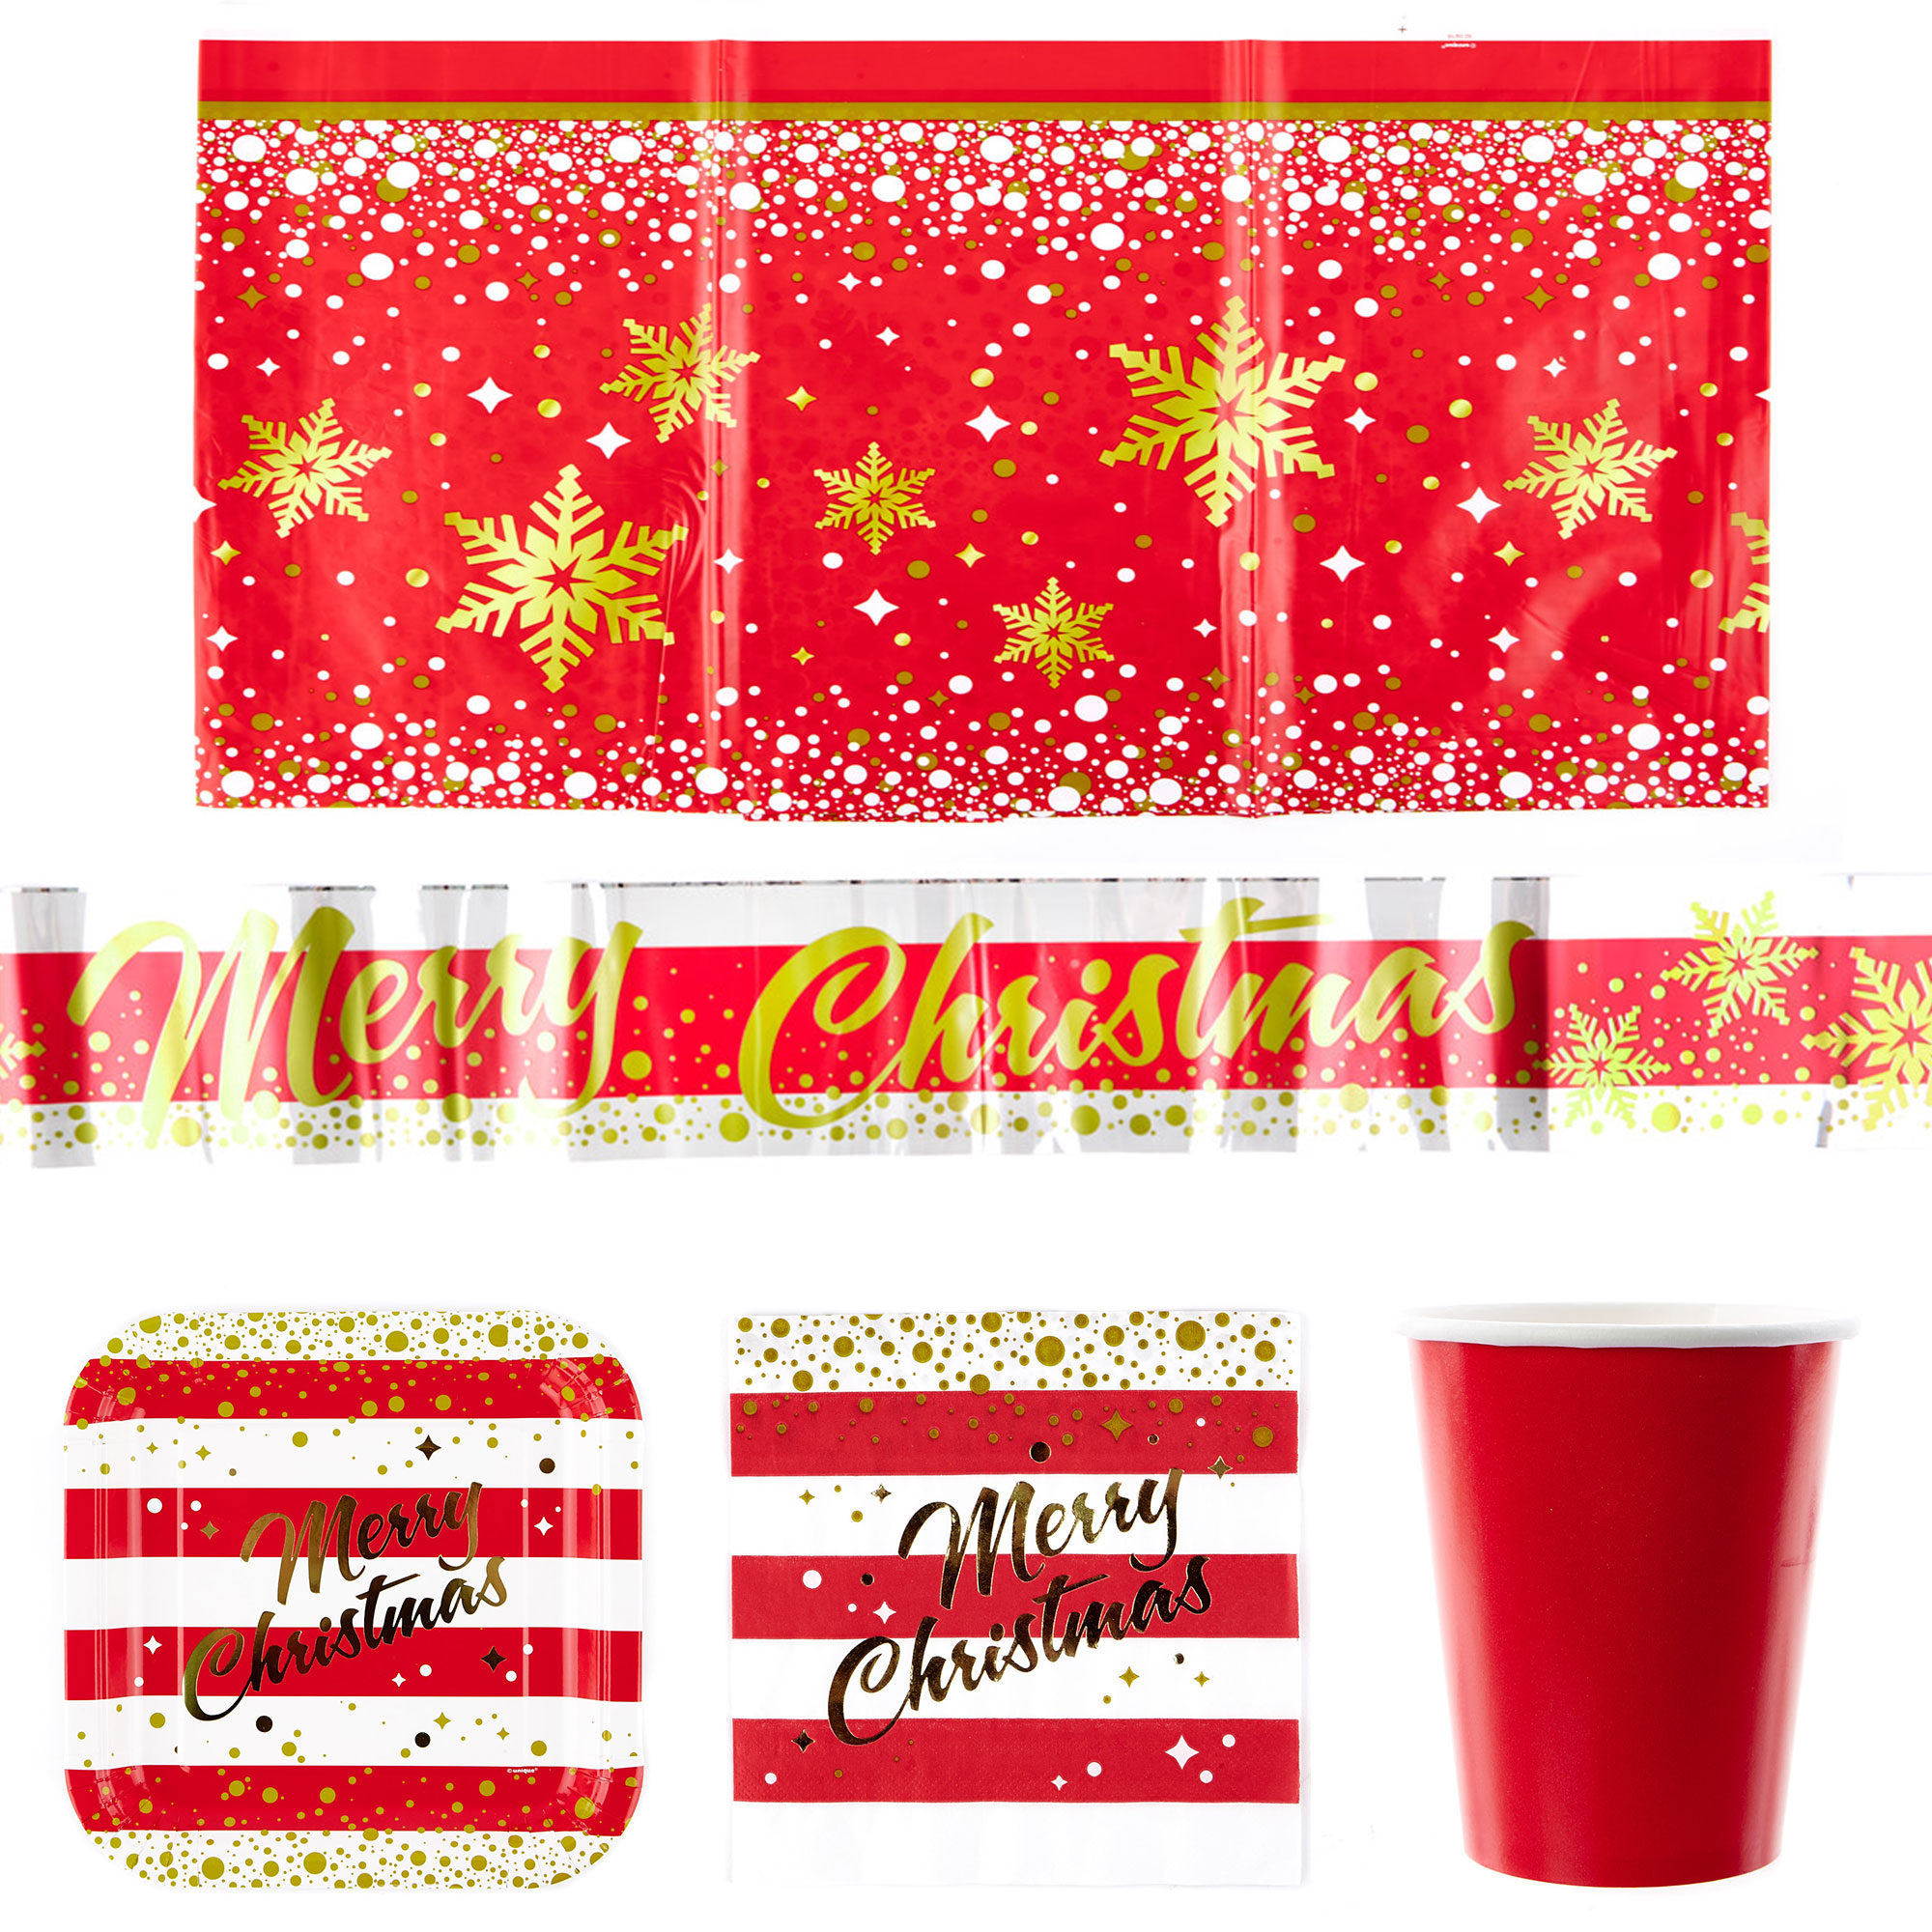 Red & Gold Christmas Party Tableware Bundle - 16 Guests